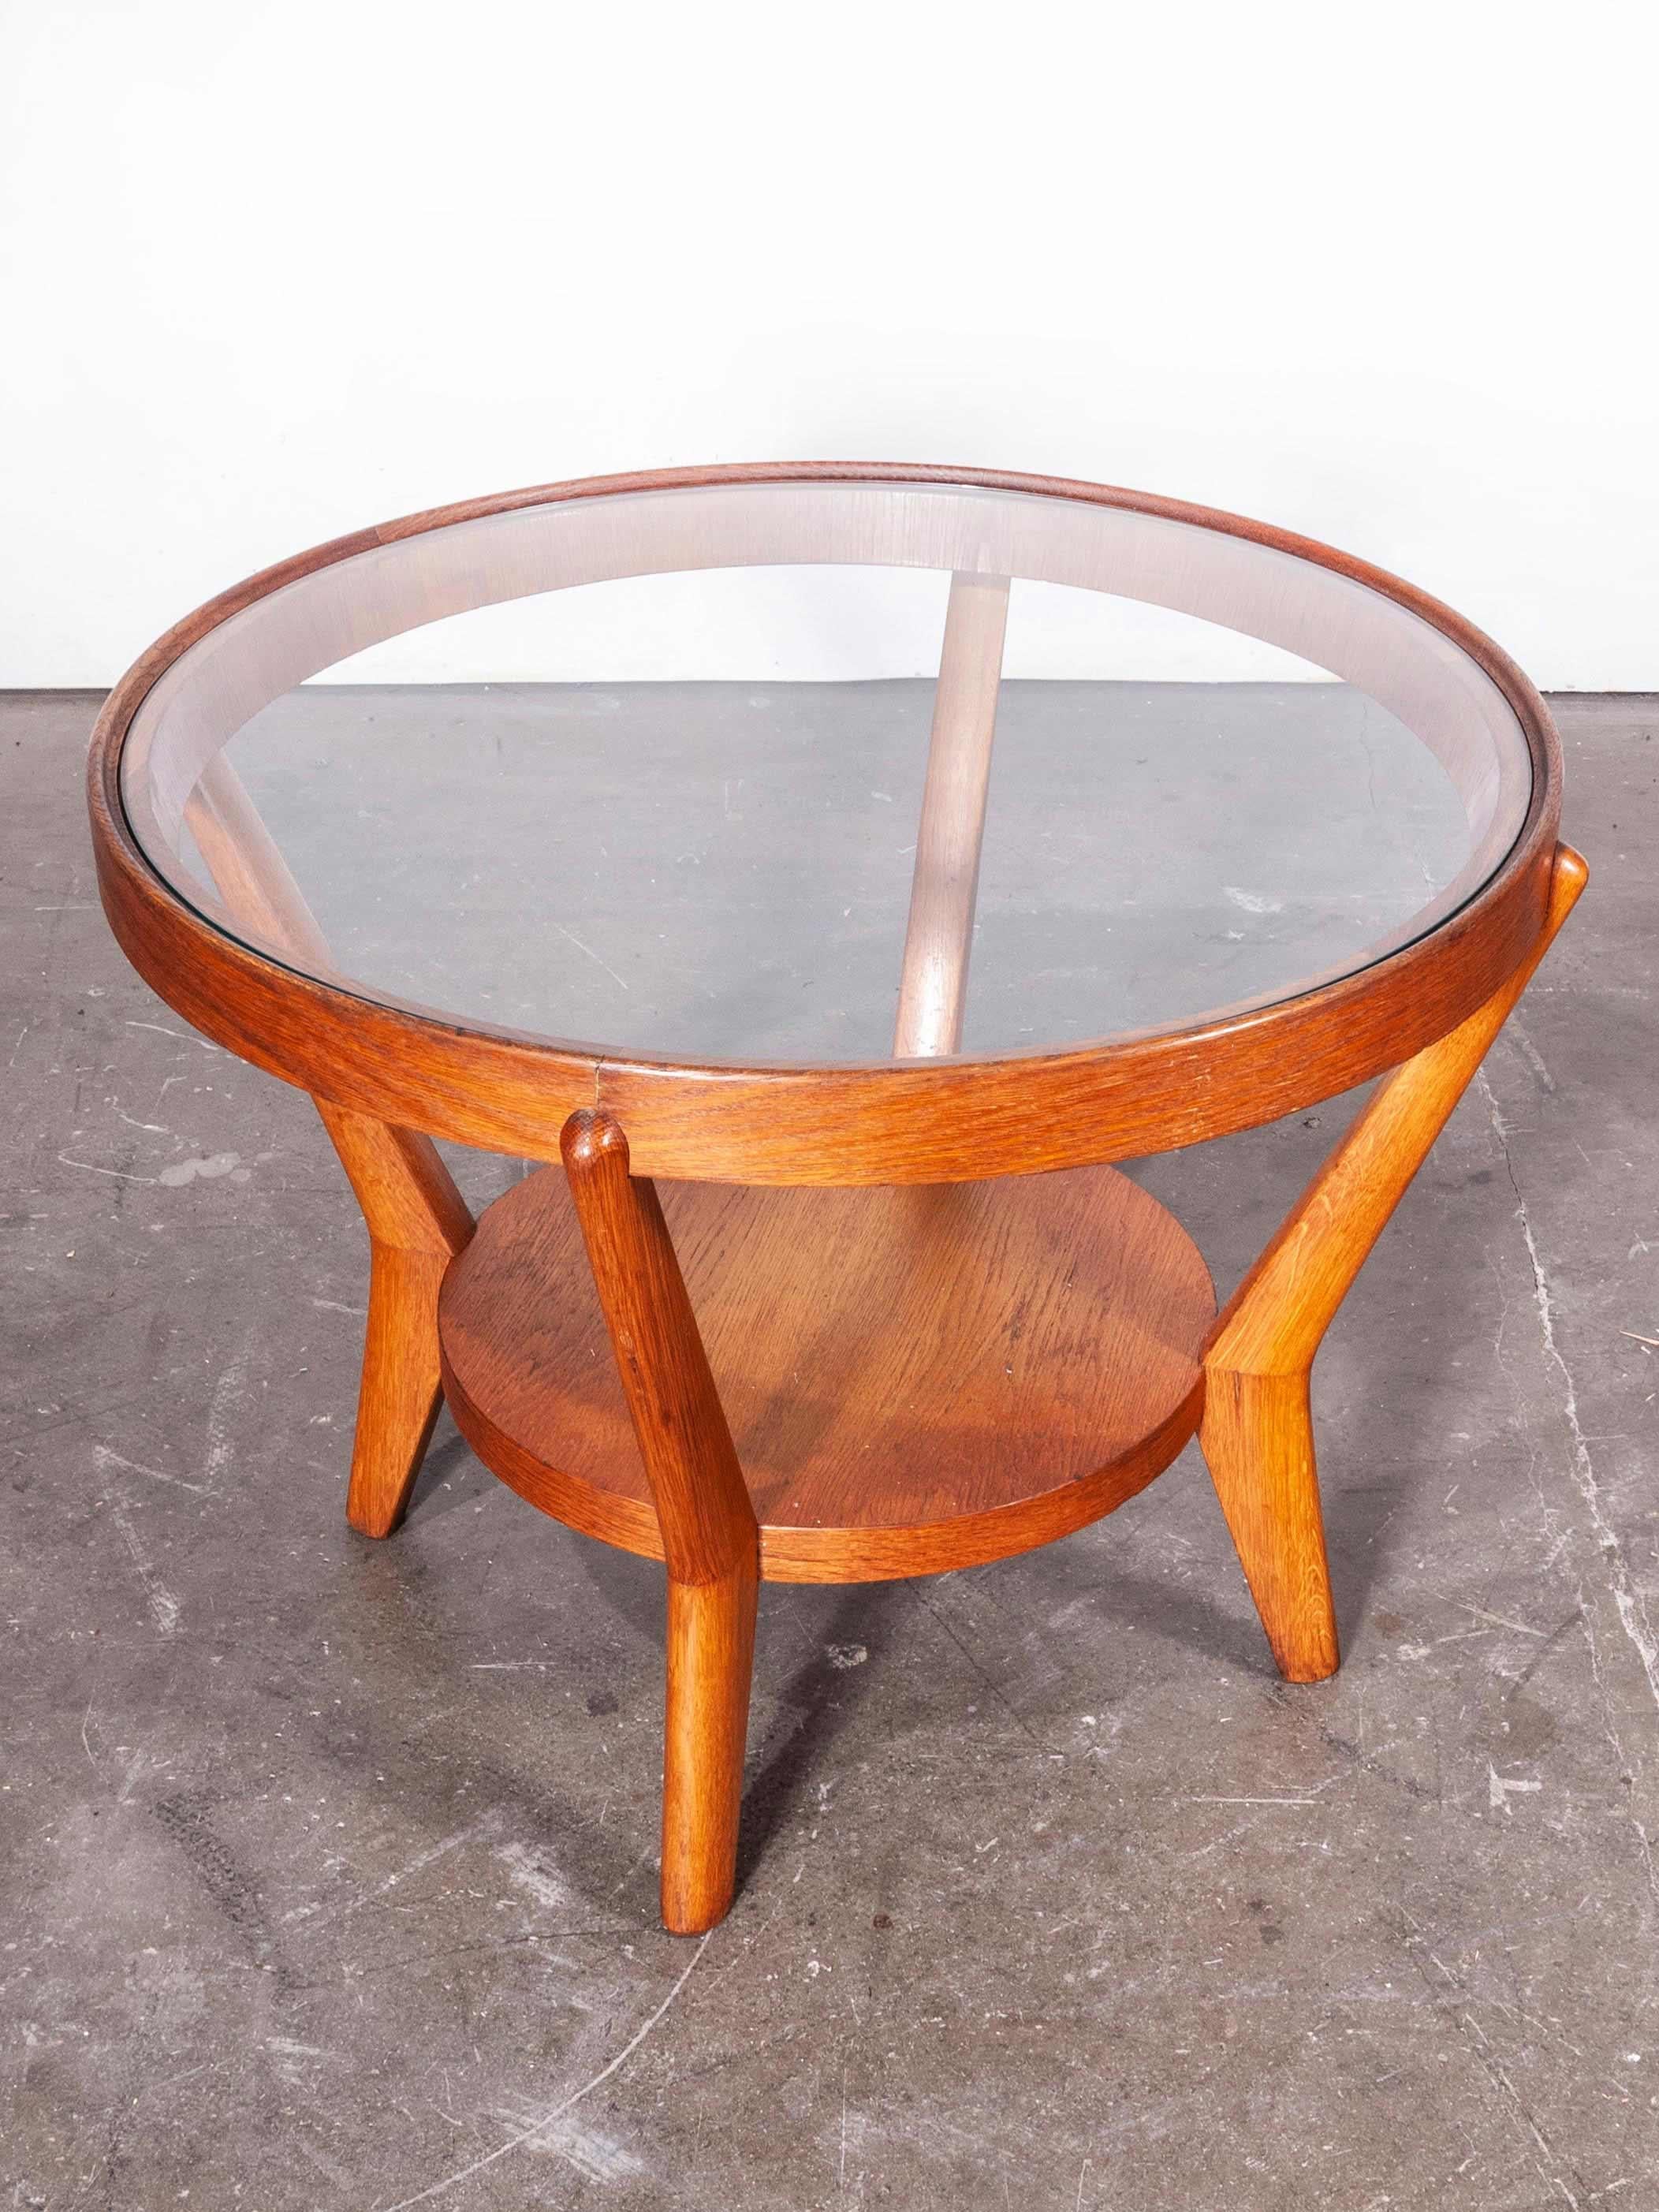 1950s Round Occasional Table by Kozelka and Kropacek for Interieur Praha, Ligh 2